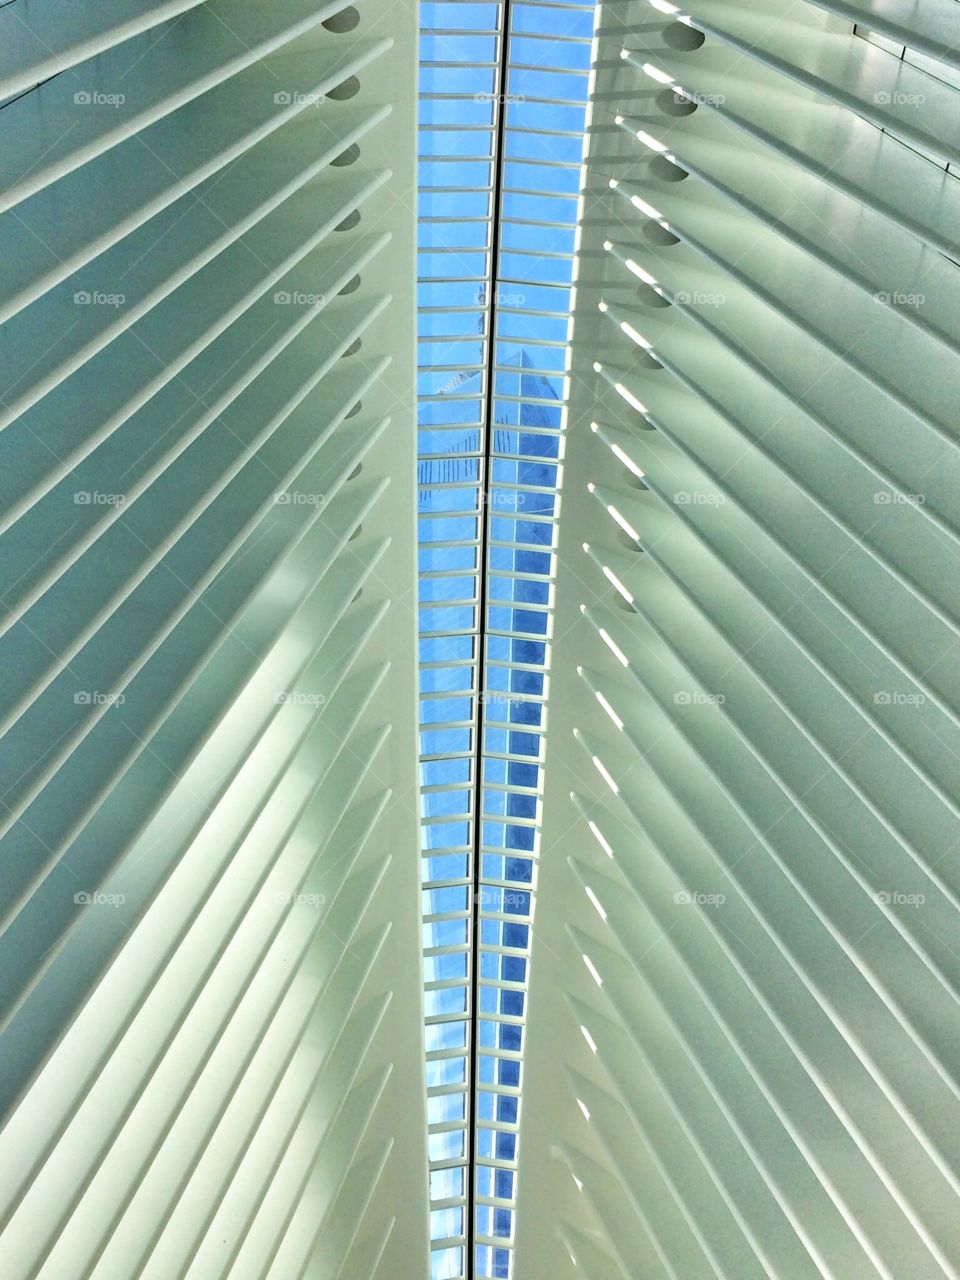 Oculus building with Freedom Tower, new york city